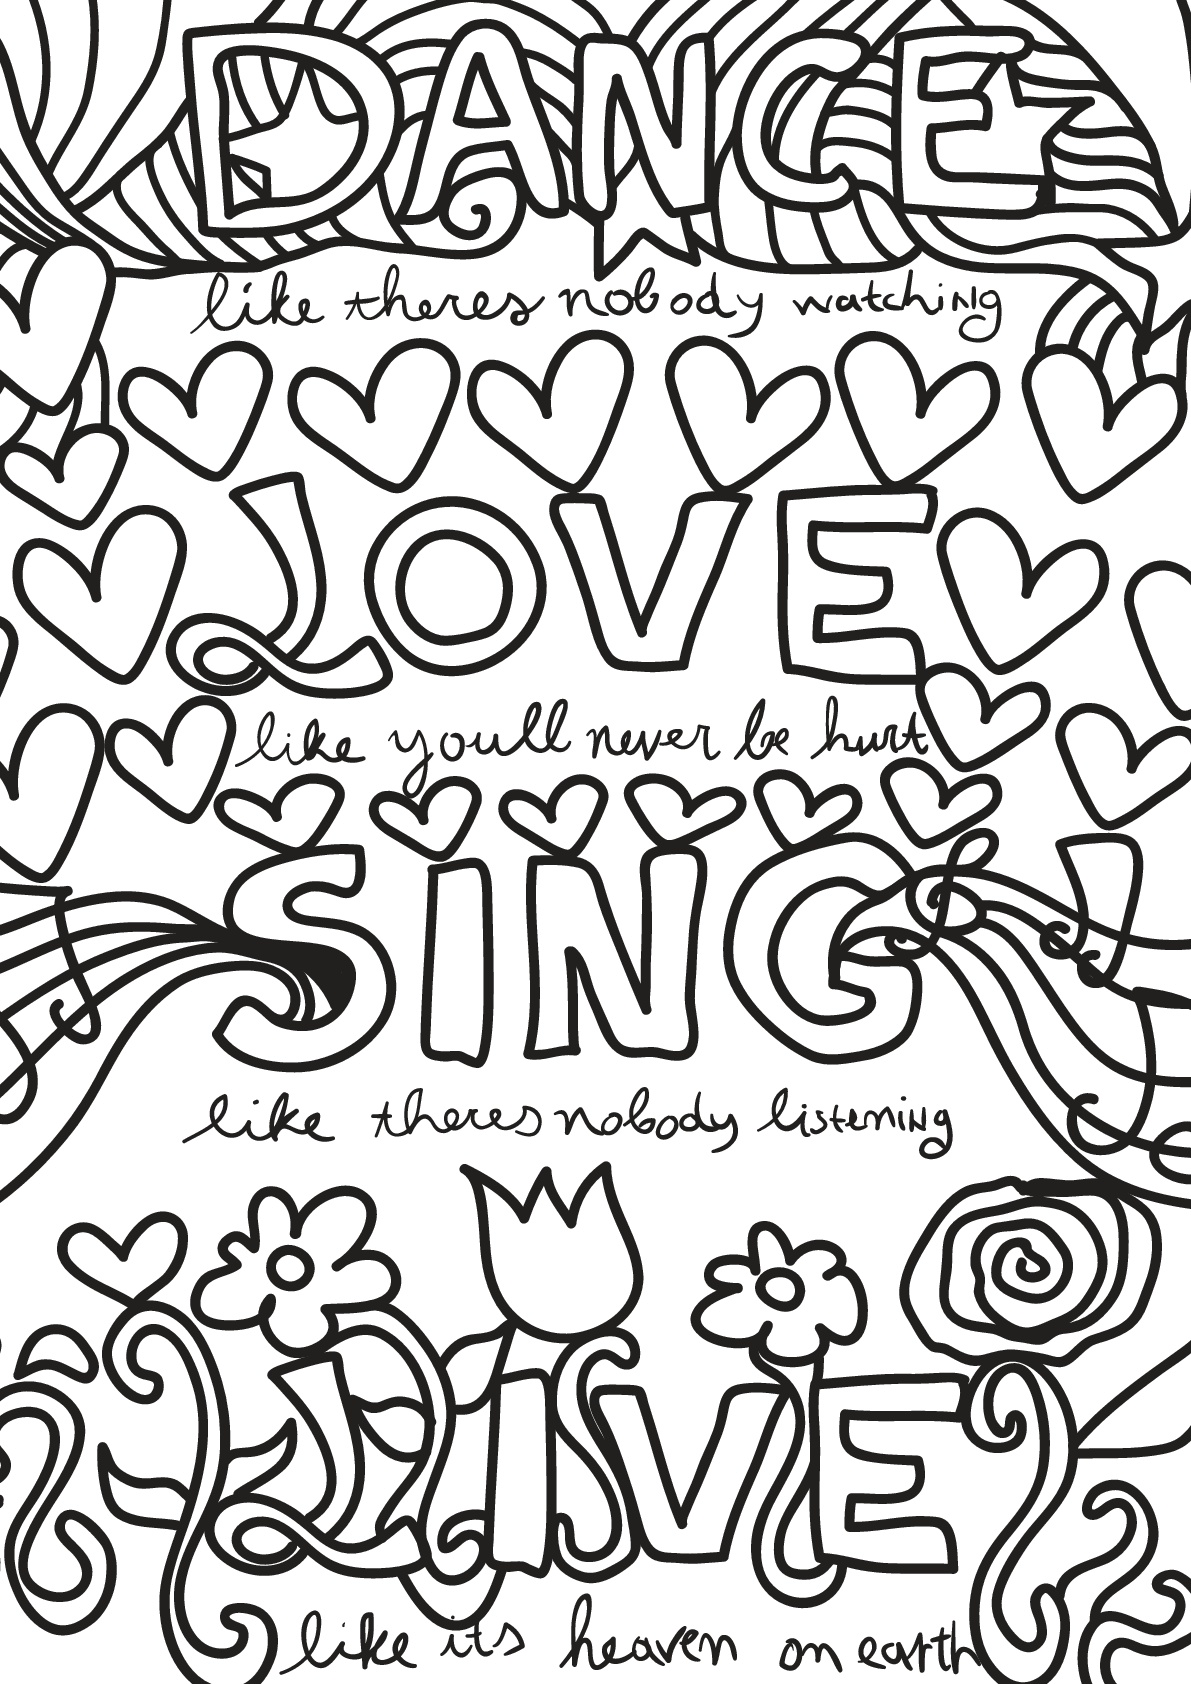 Free book quote 18 - Positive & inspiring quotes Adult Coloring Pages